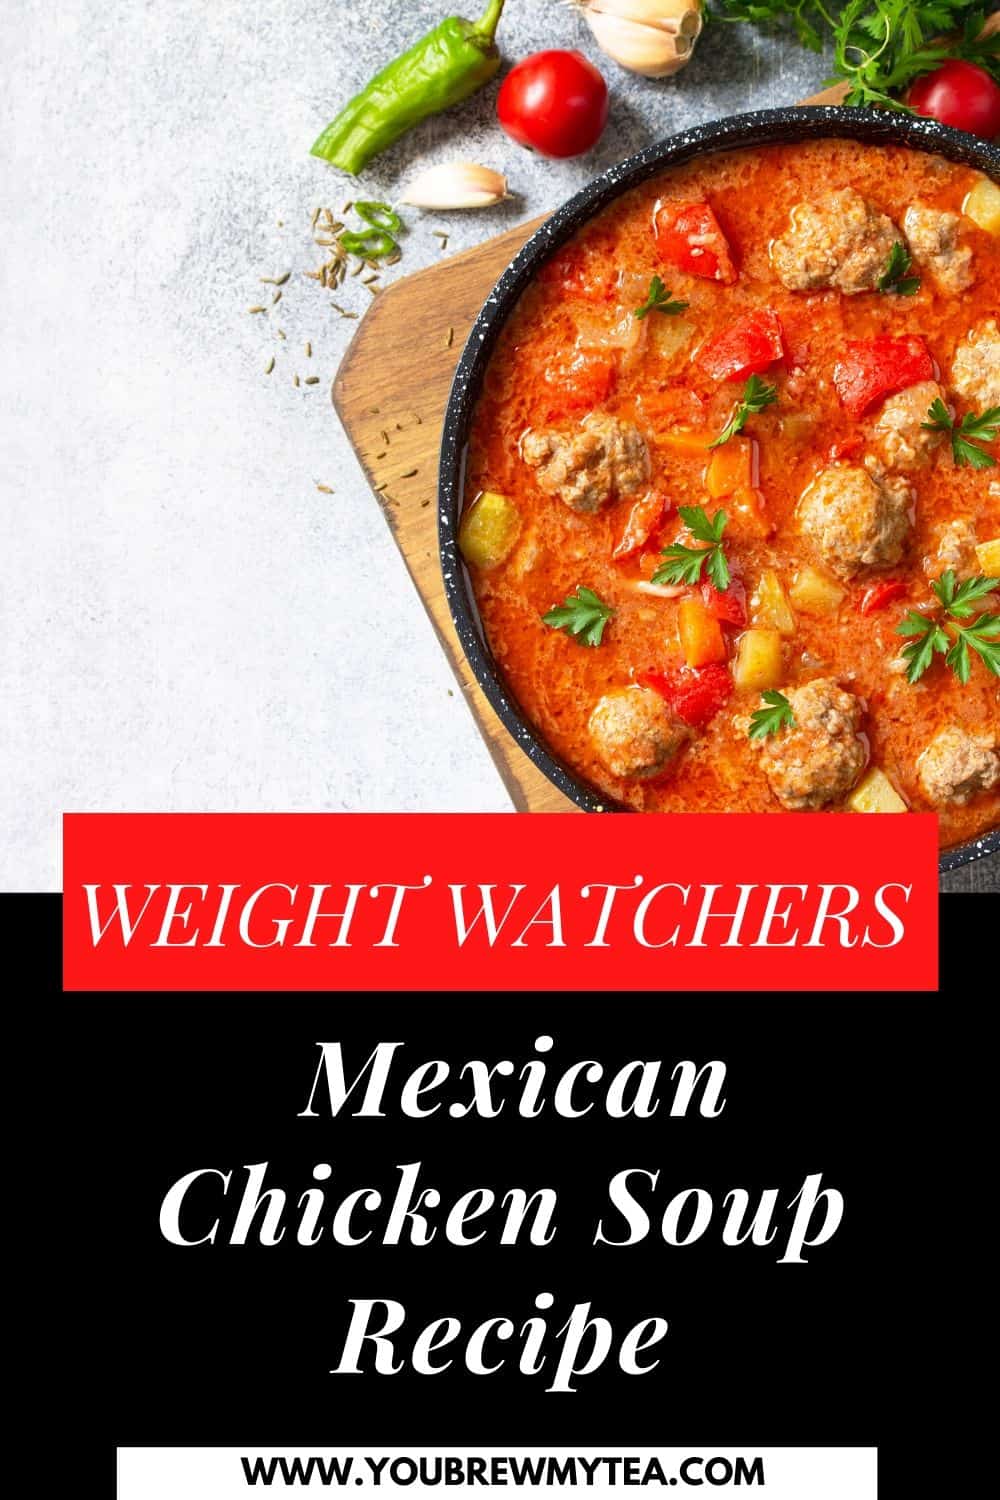 Weight Watchers Soup: Mexican Chicken Soup